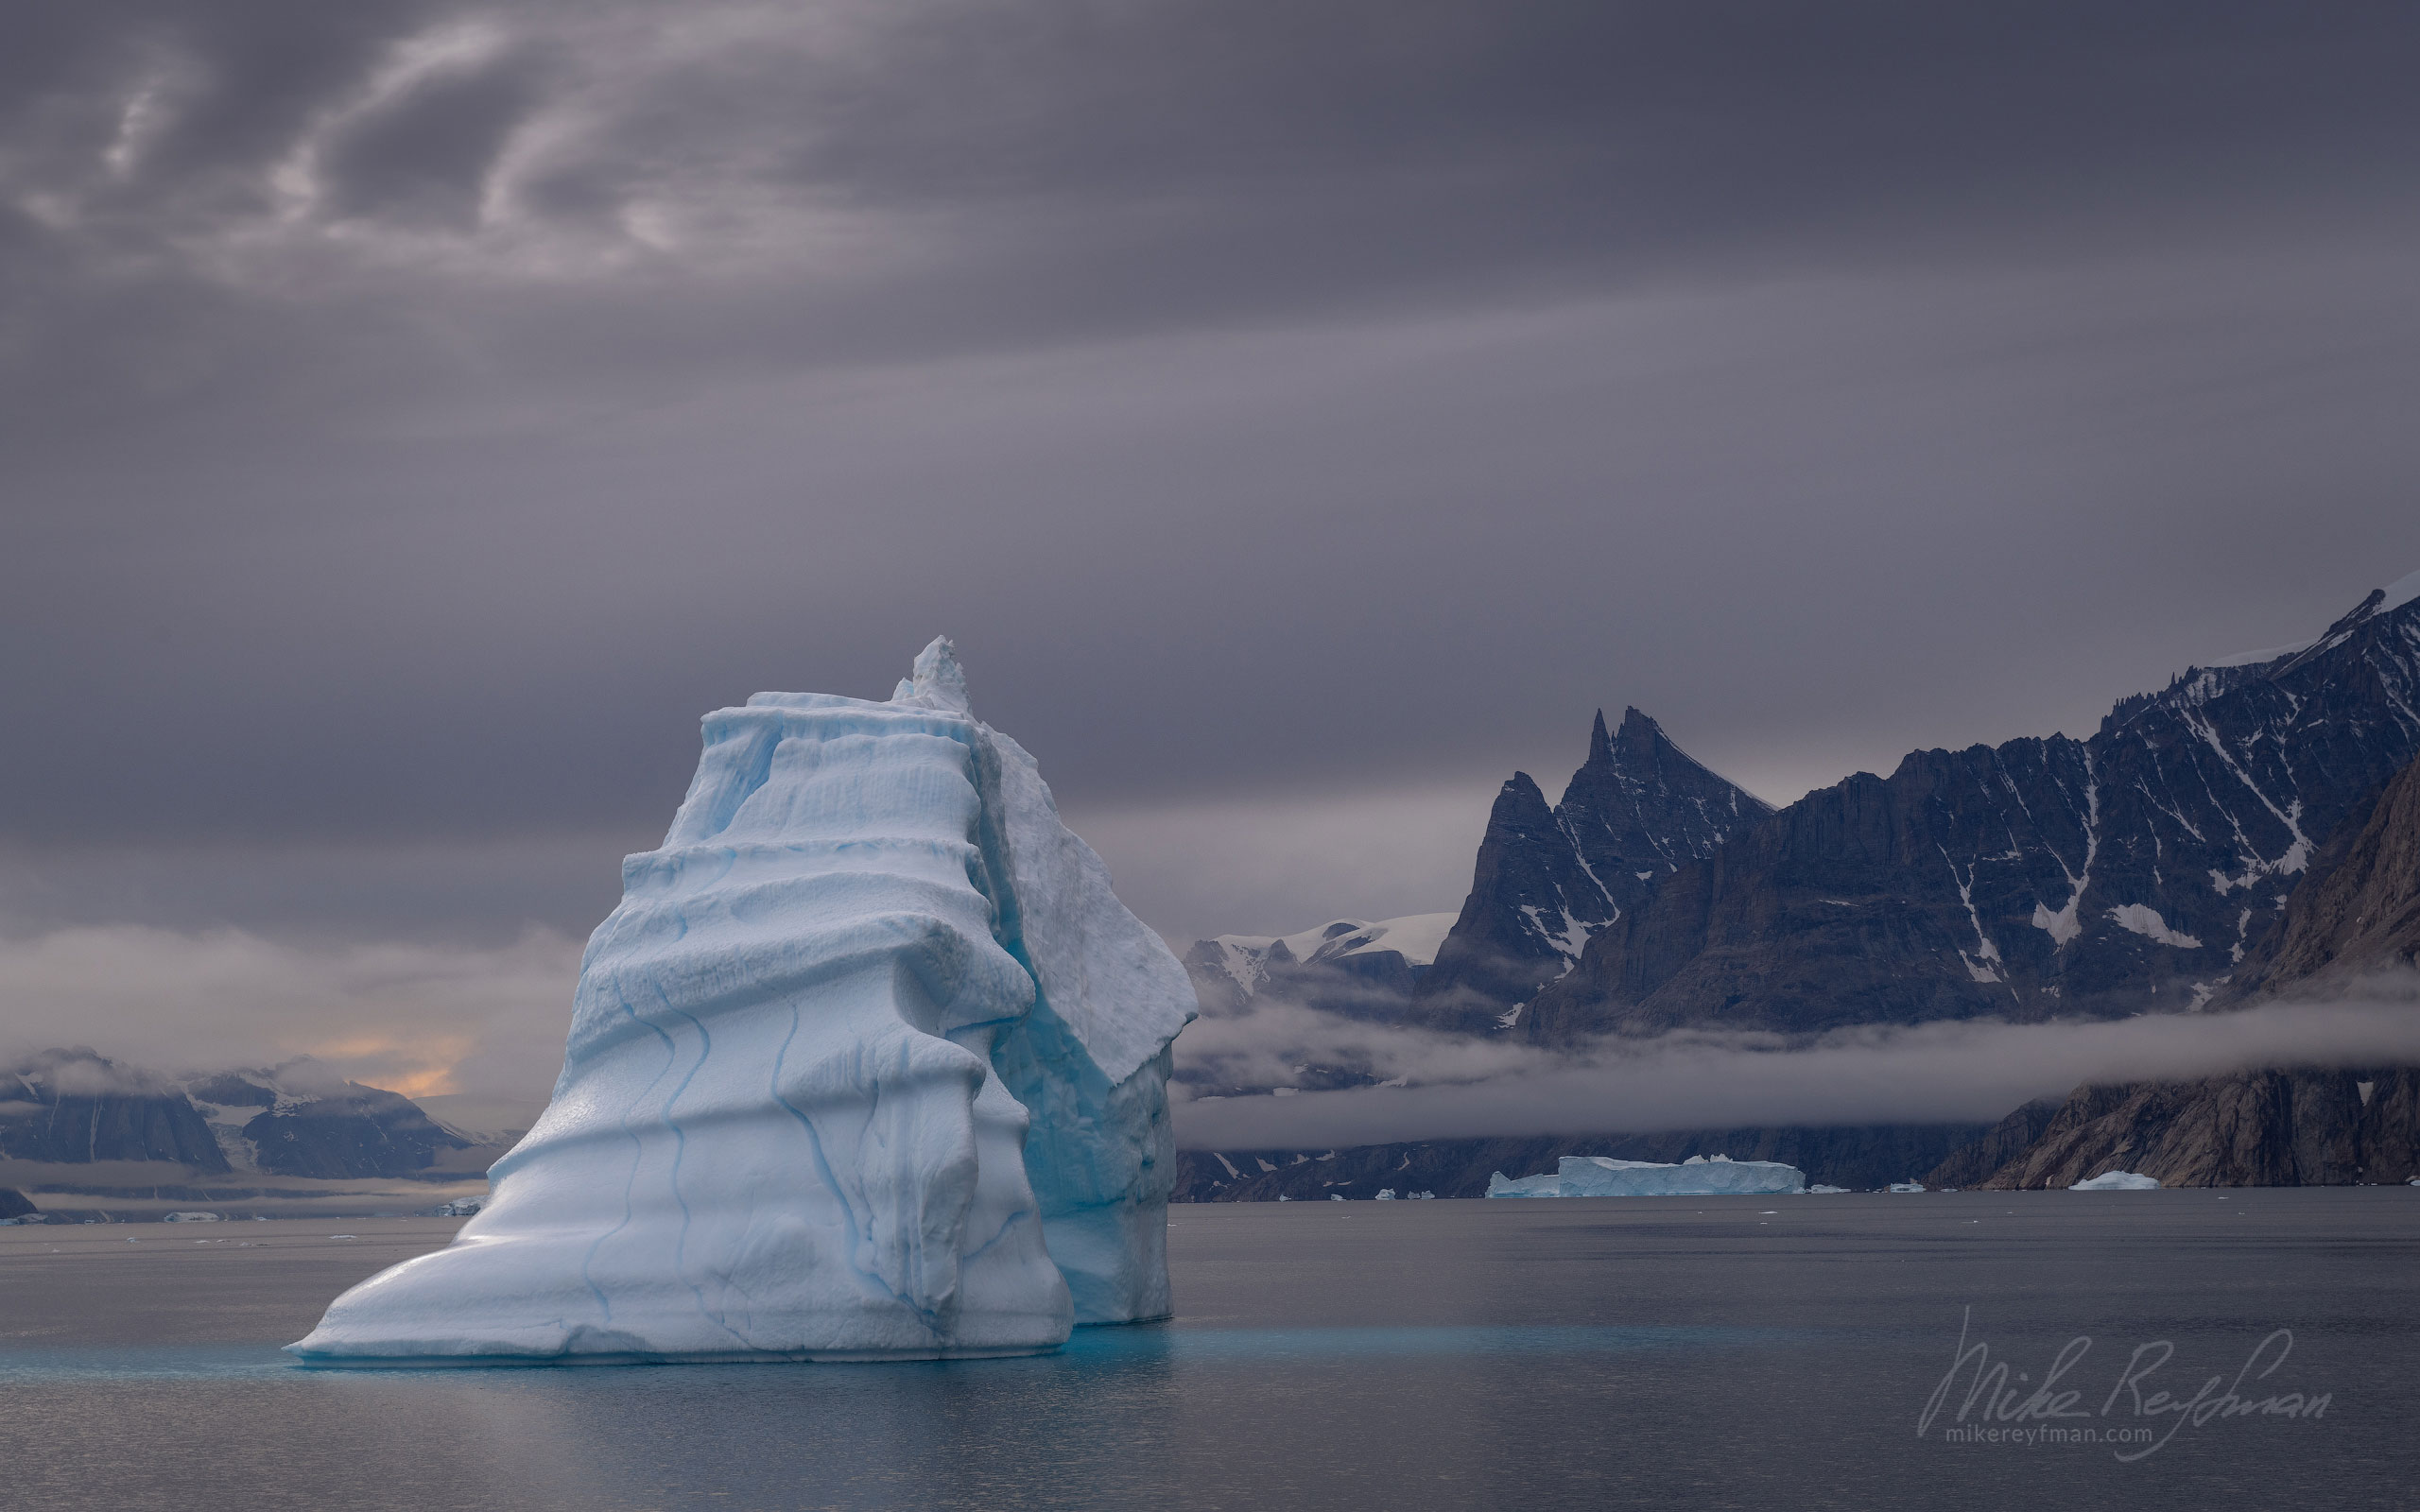 Iceberg in Scoresby Sund. Greenland. 006-GR-SC_50B7674 - The Scoresby Sund fjord system and the settlement of Ittoqqortoormiit. East Greenland. - Mike Reyfman Photography